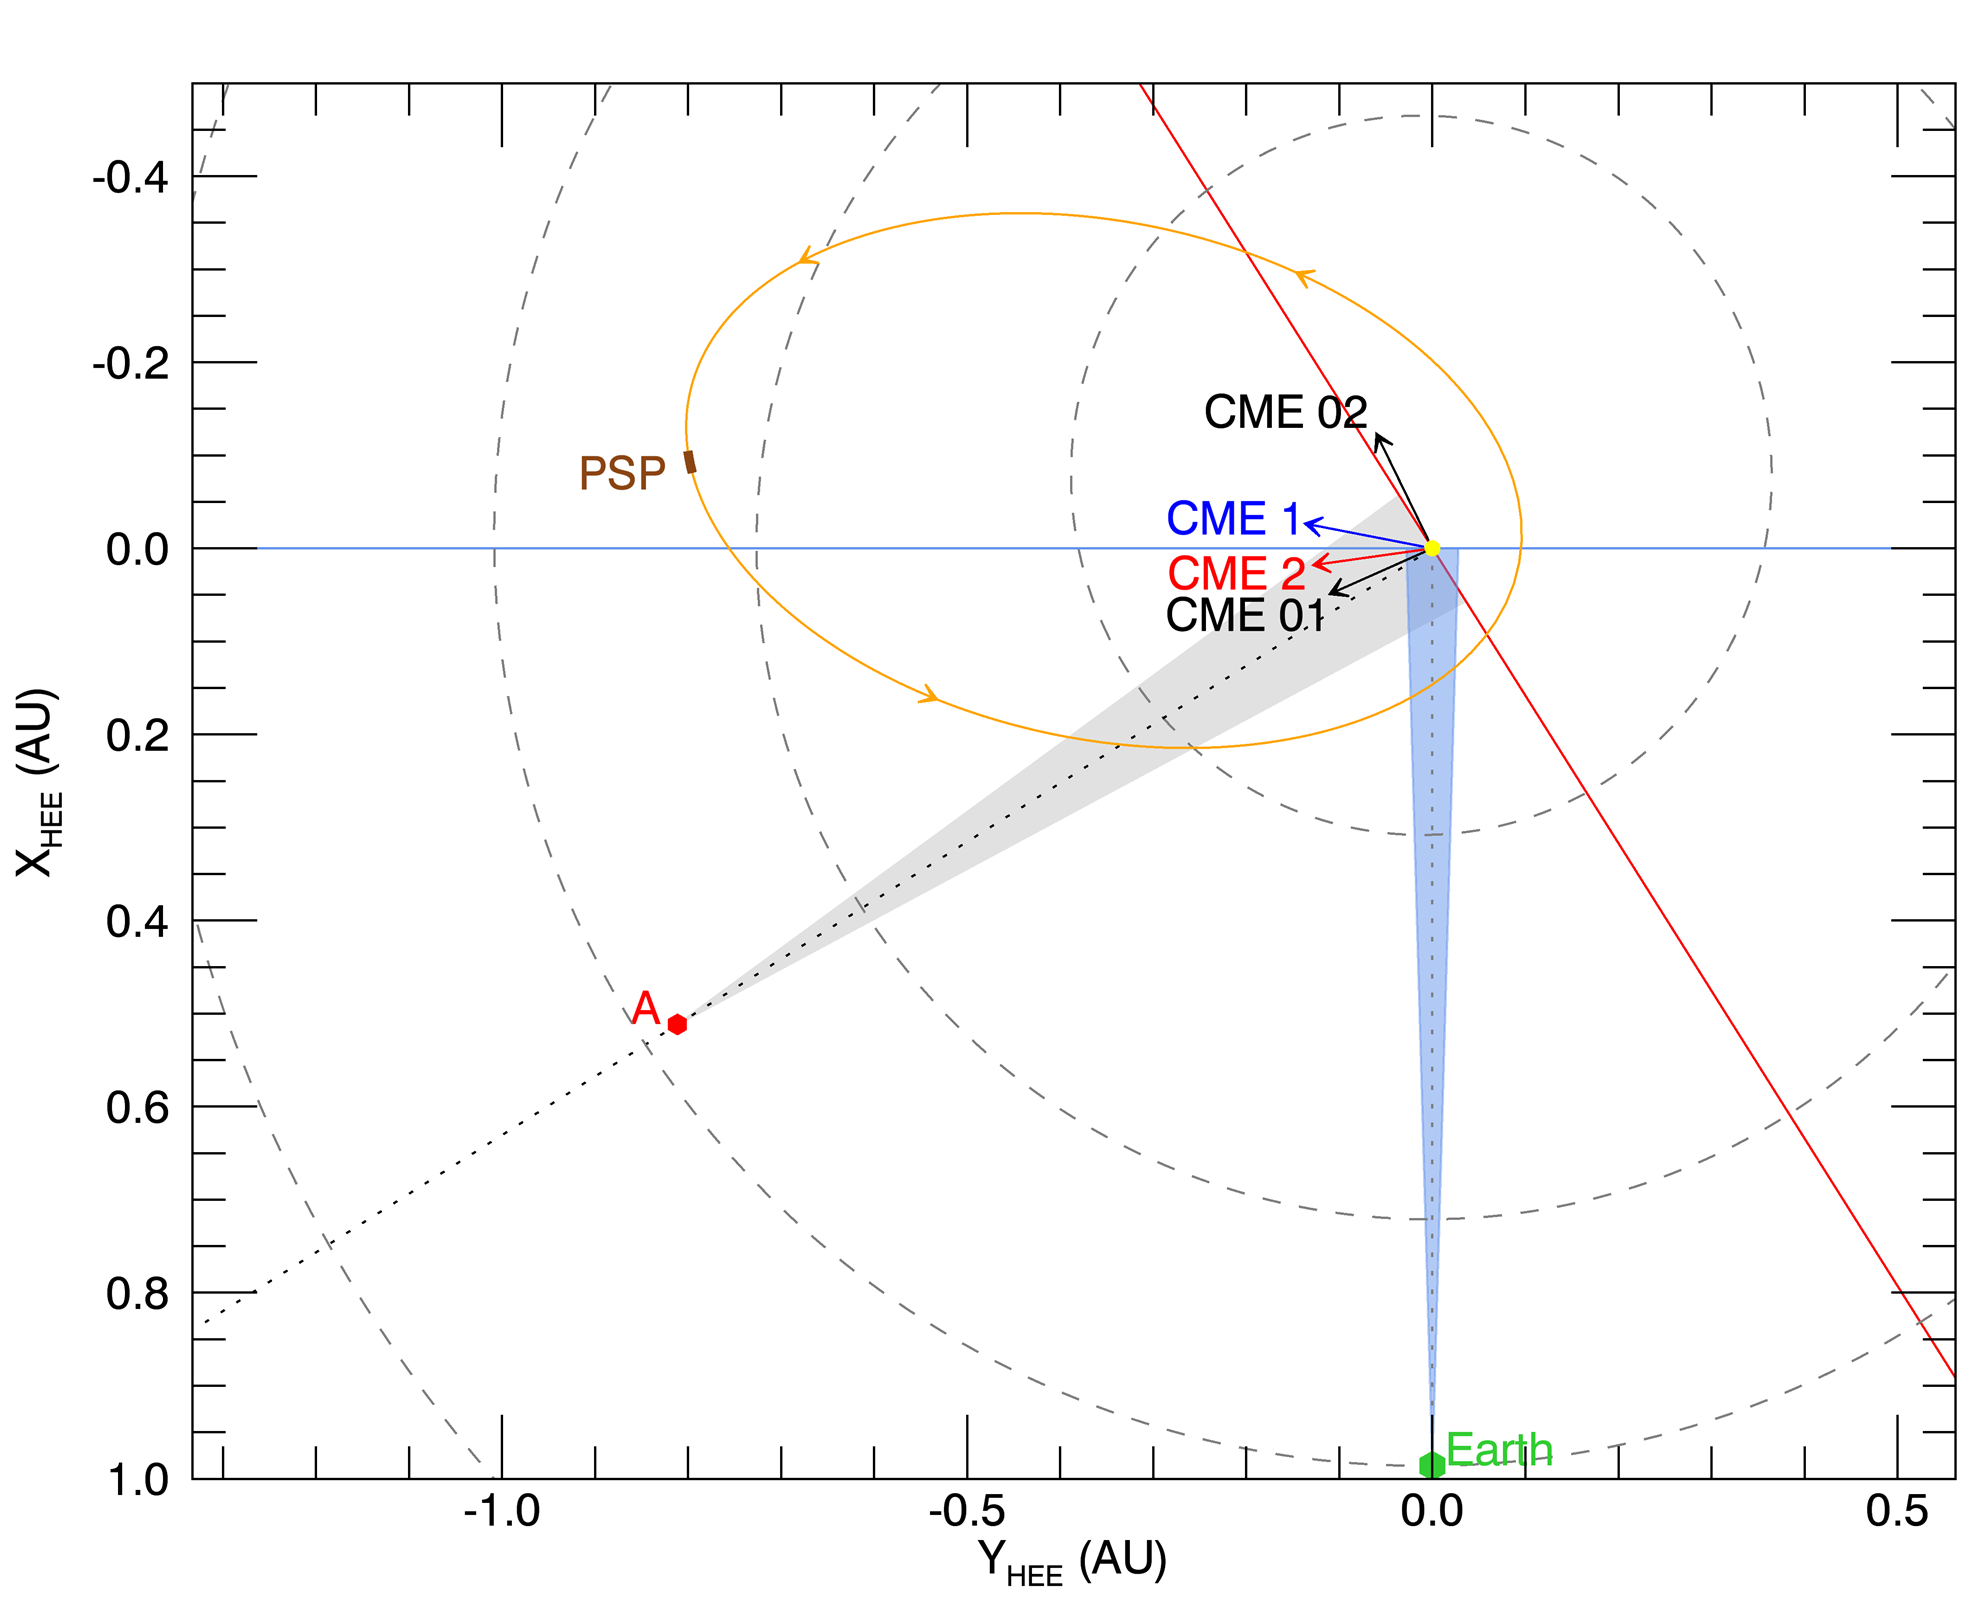 Map of the solar–heliospheric spacecraft location (during the November 29 to December 1 period) and capabilities: PSP (orange), STEREO-A (A; red), and Earth (green), which includes the STEREO-A/COR2 field of view in gray color and blue color for SOHO/C2 telescopes. The arrows represent the central direction of propagation of the four CMEs.